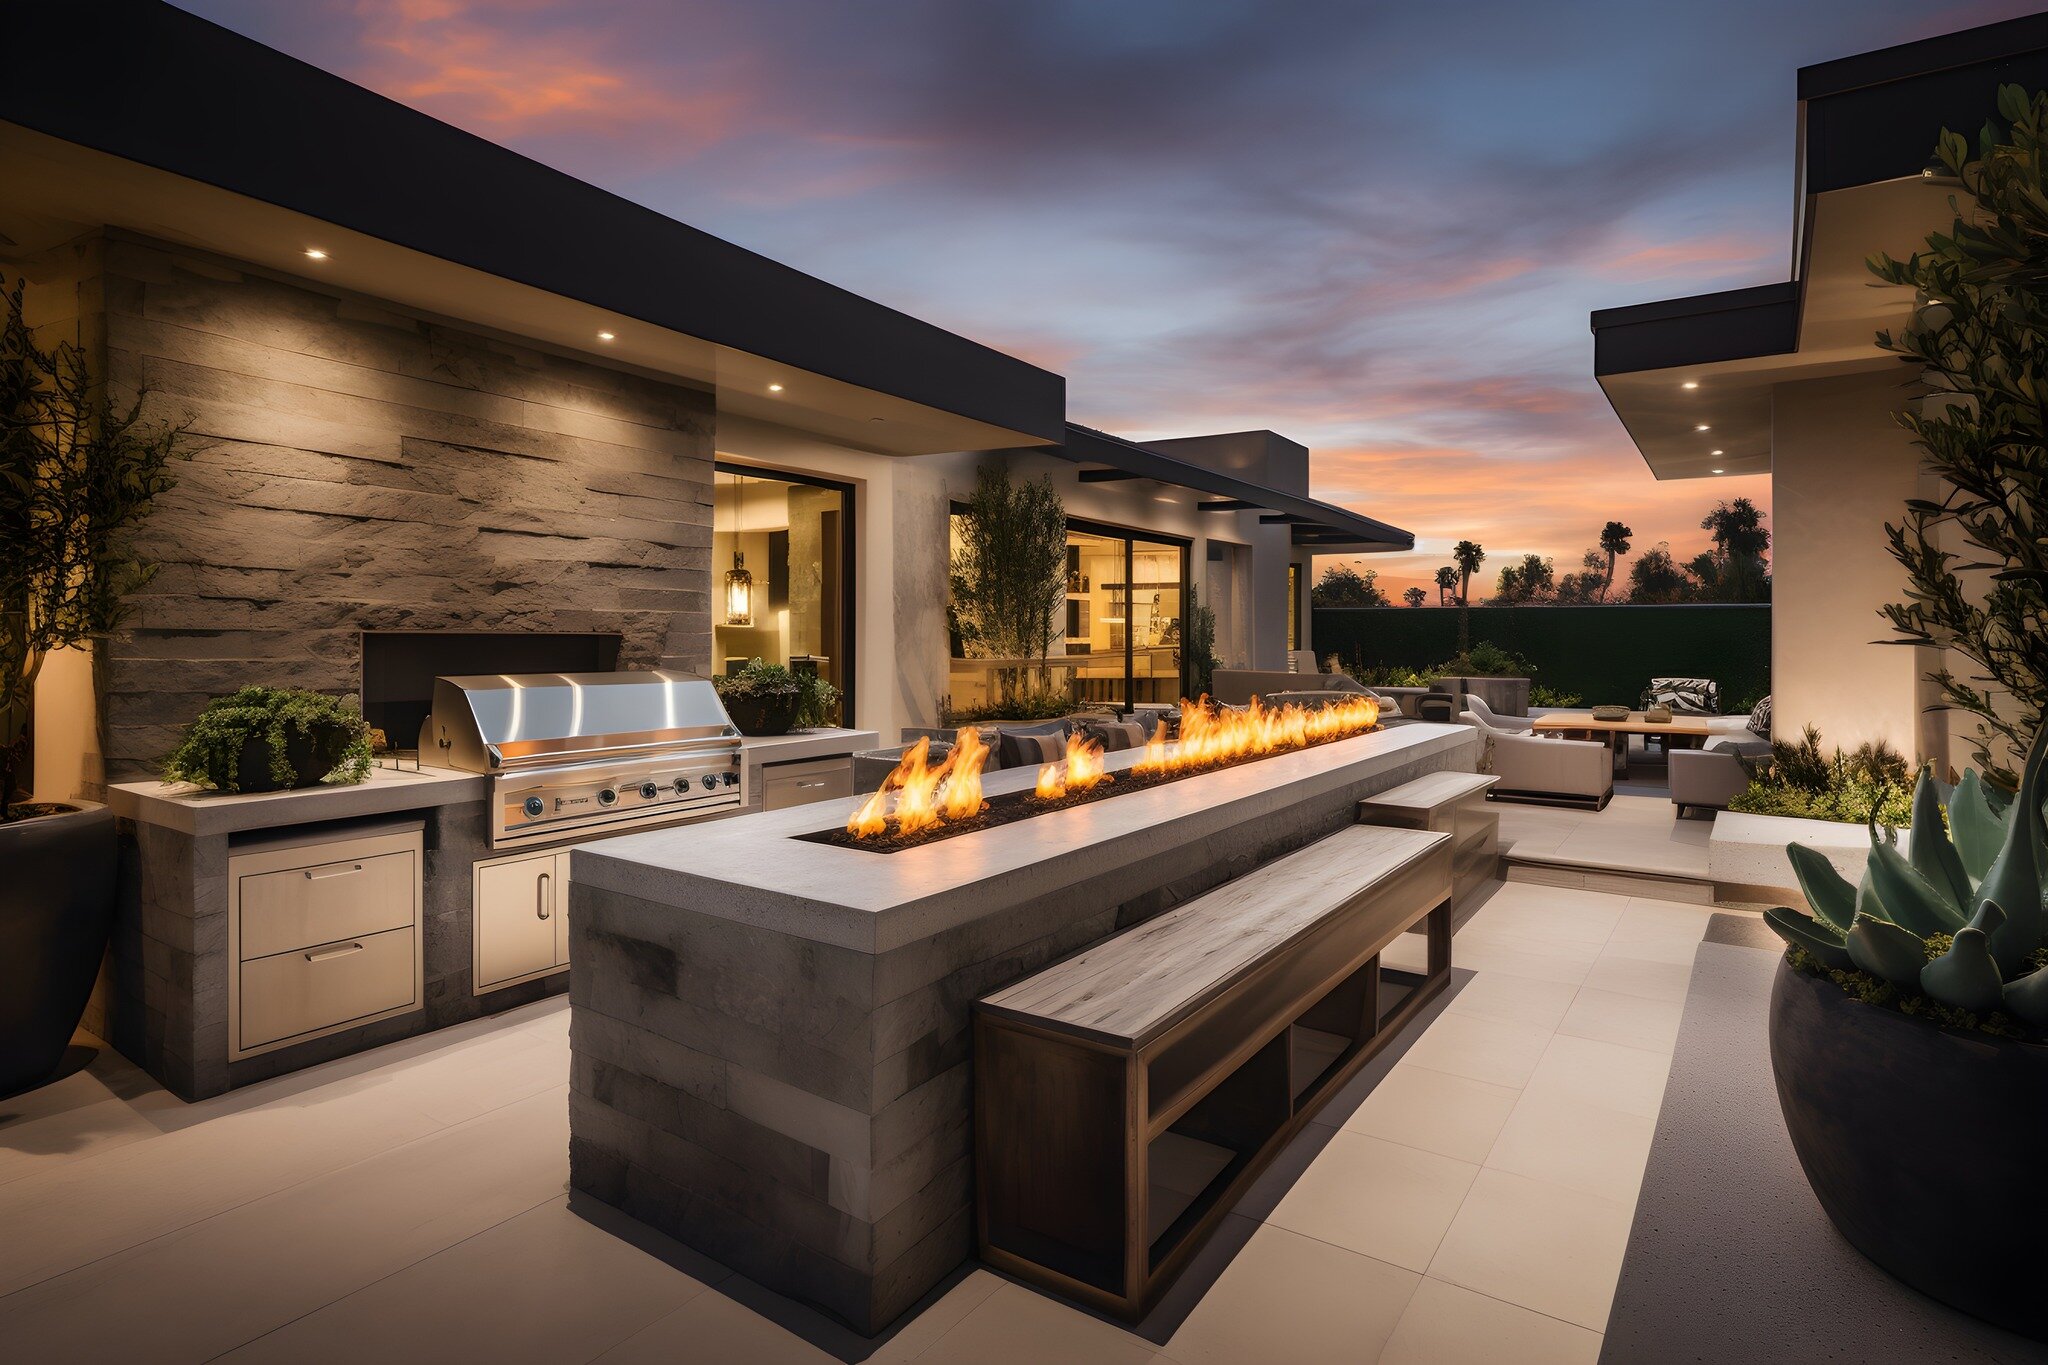 Unleash Backyard Potential with Fire. Unleash your backyard's potential with our chic outdoor fire features🔥. Let us turn your outdoor living into a warming experience. #OutdoorLiving🌴

📷: Pinterest

#sweepsnladders #fireplacerenovation #chimneysw